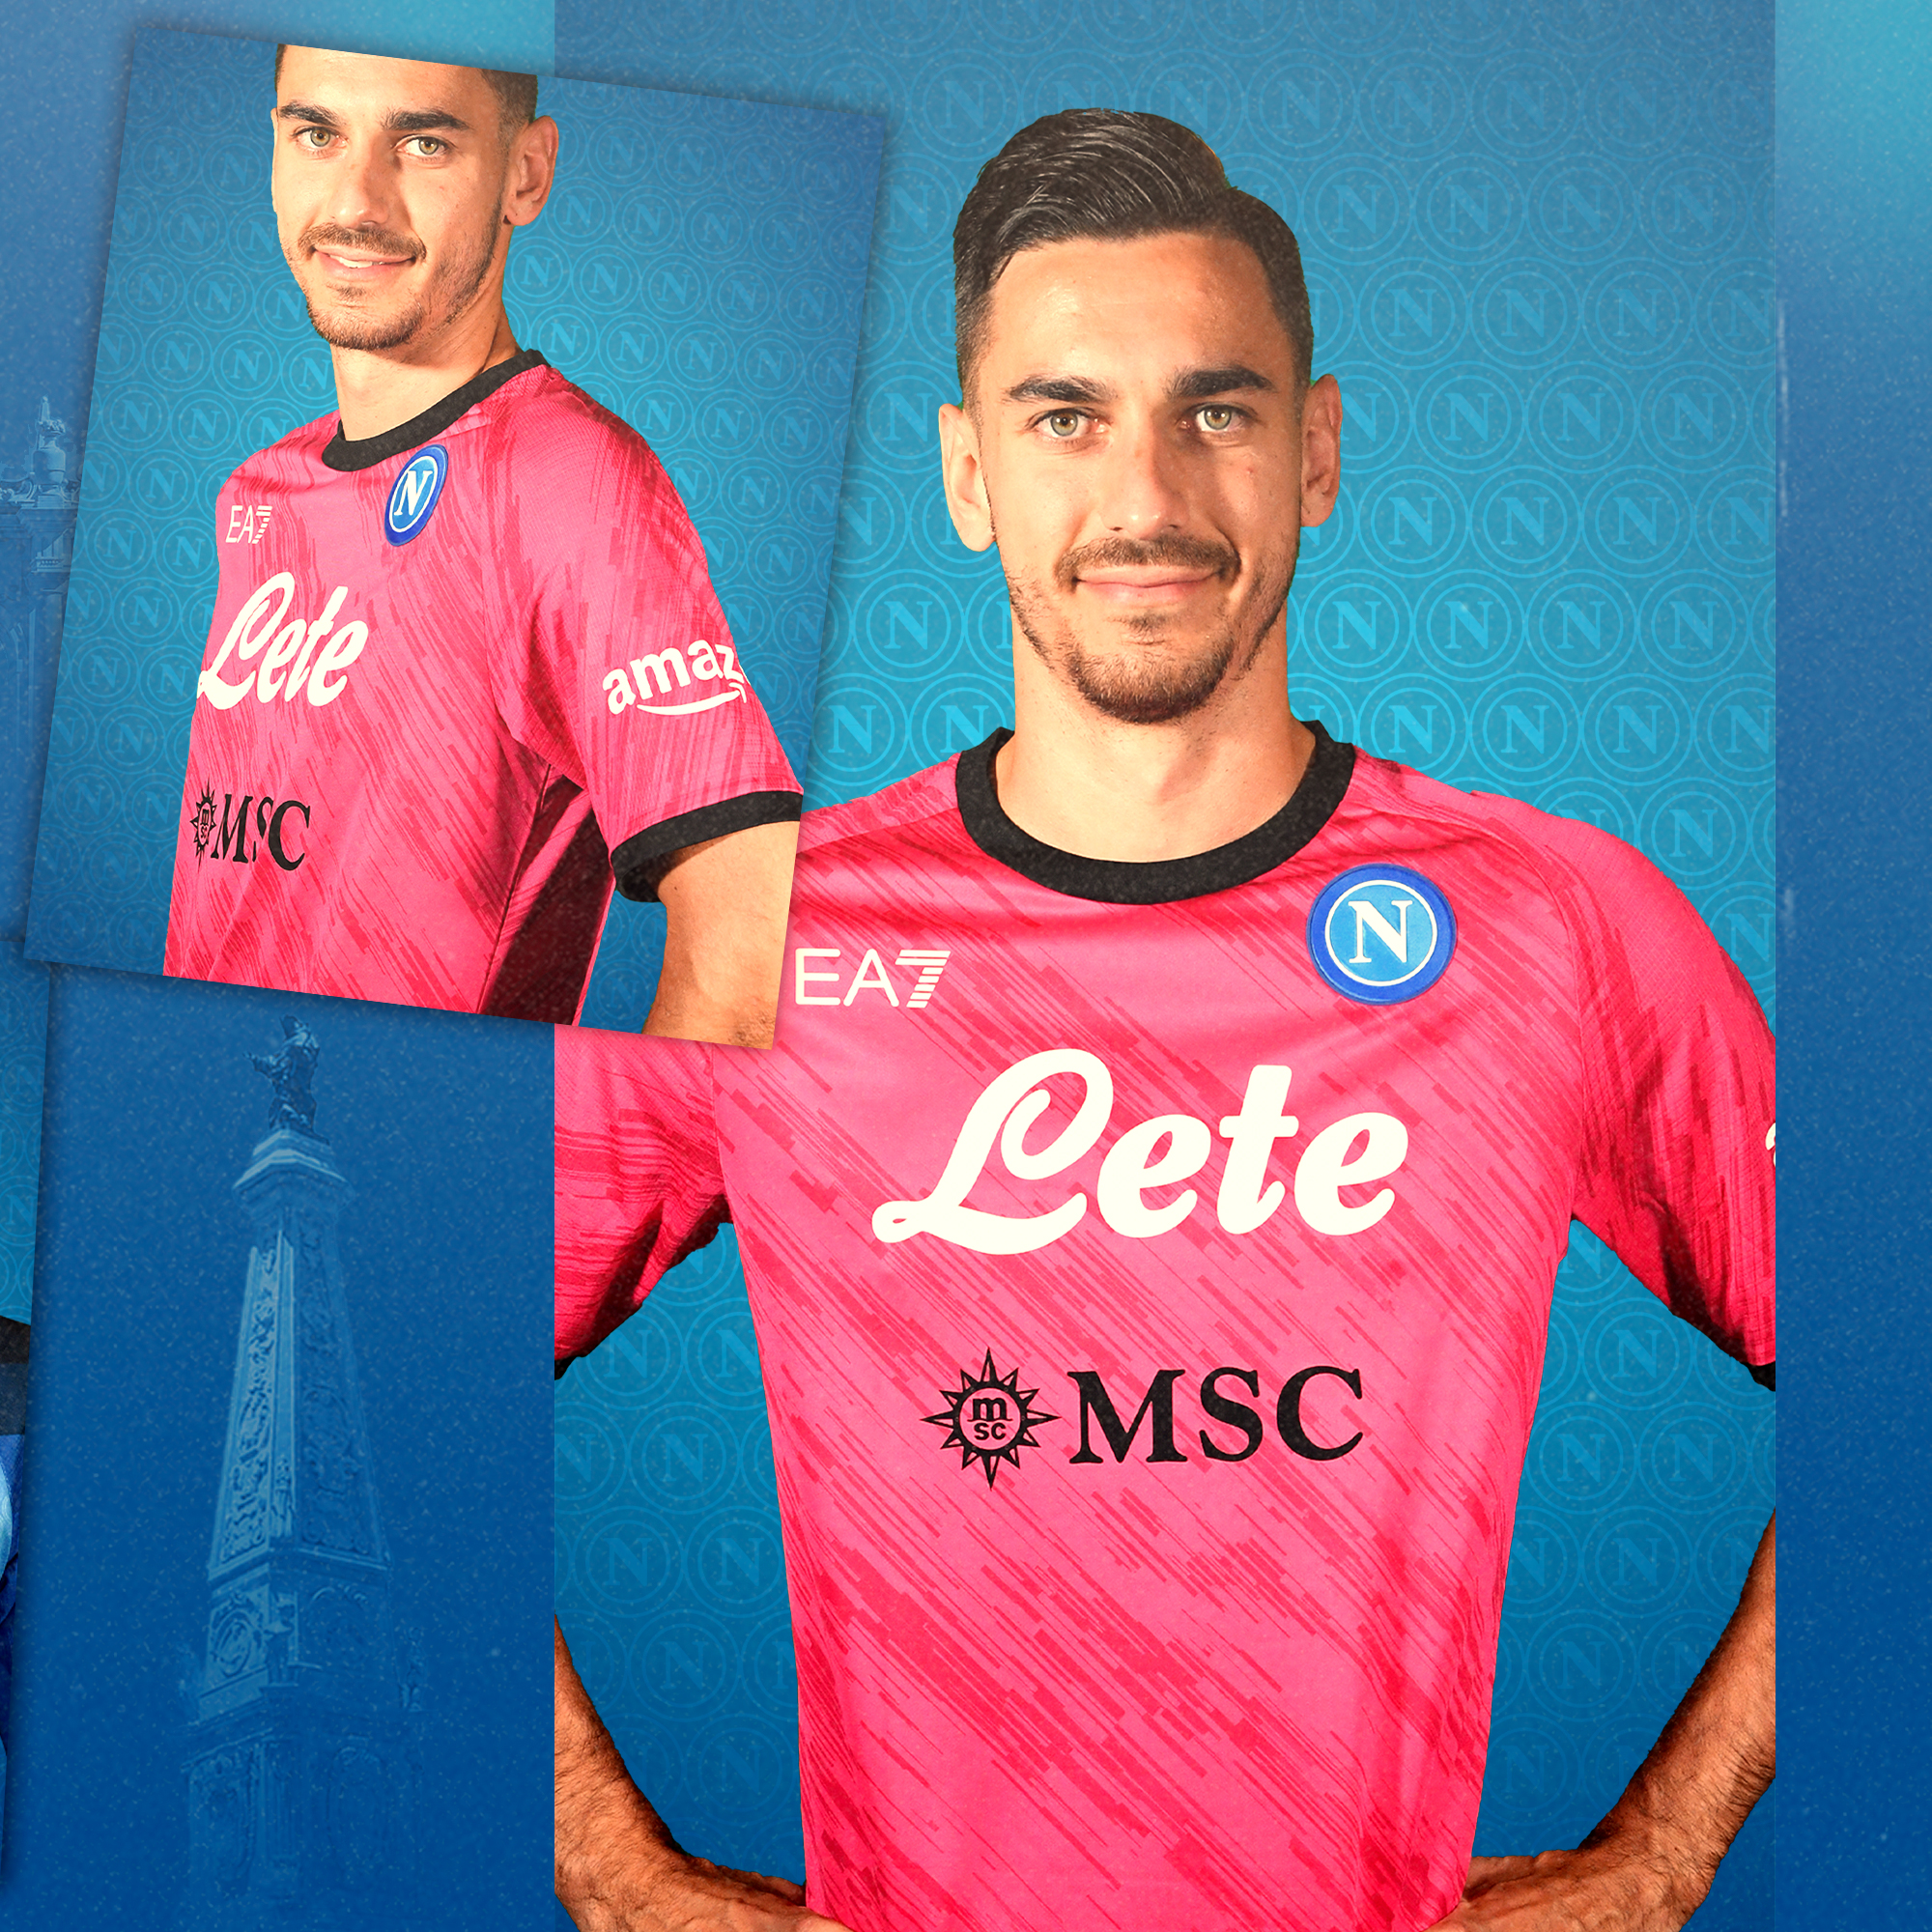 Official SSC Napoli on Twitter: "ORA DISPONIBILE! NOW AVAILABLE! 👇 🛒  Official Web Store SSC Napoli: https://t.co/XmWZkZzHdV 🛍 Brand Store  Amazon: https://t.co/NKOFiuz8yW 🏪 Official Store SSC Napoli:  https://t.co/8t3FvYgTRB 💙 #ForzaNapoliSempre ...